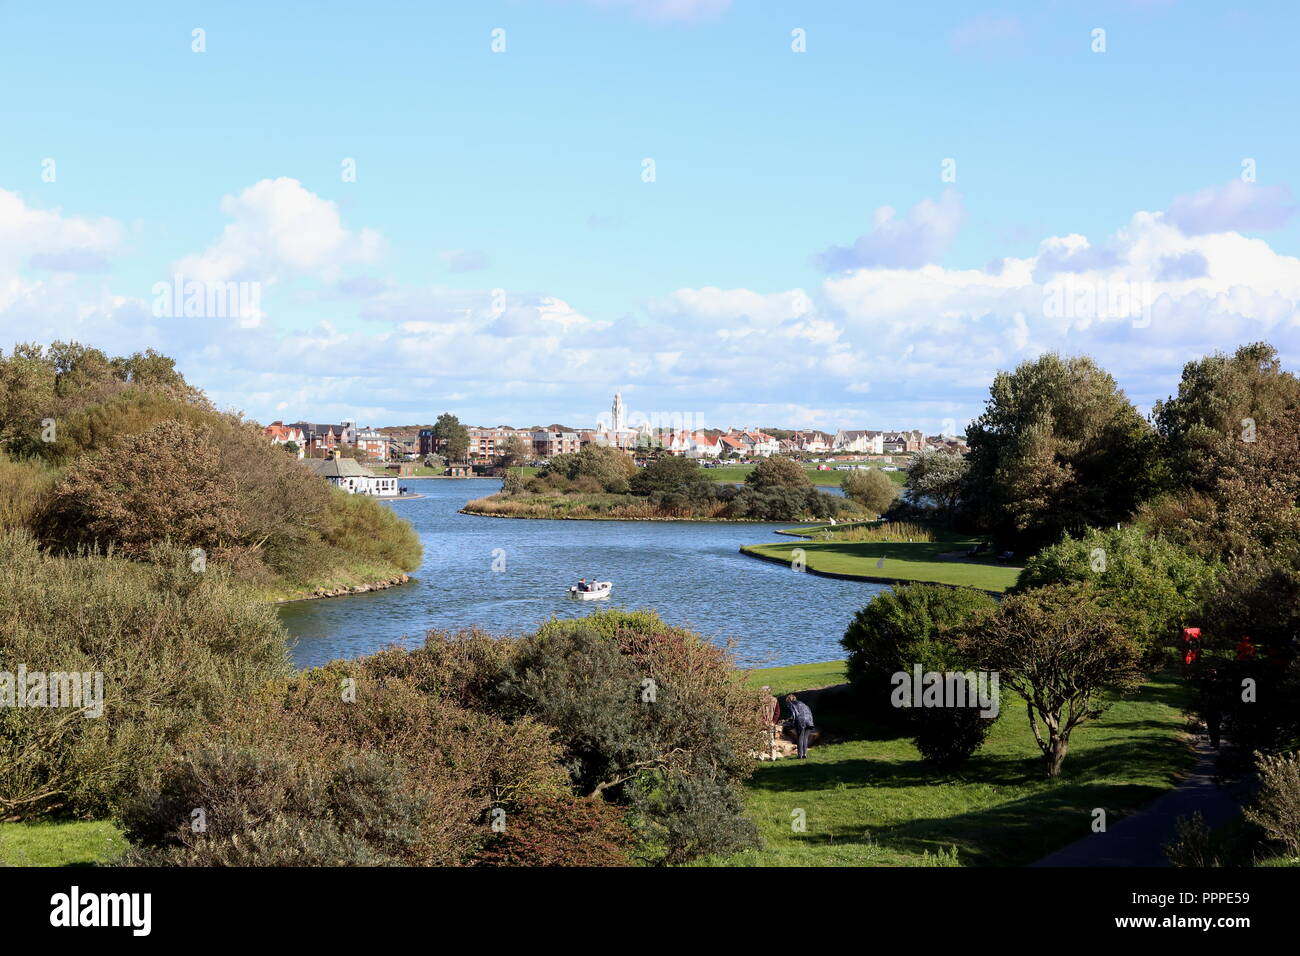 Fairhaven Lake, Lytham, Lancashire. A popular tourist area with views across the lake to the Famous 'White Church' at Lytham. Stock Photo